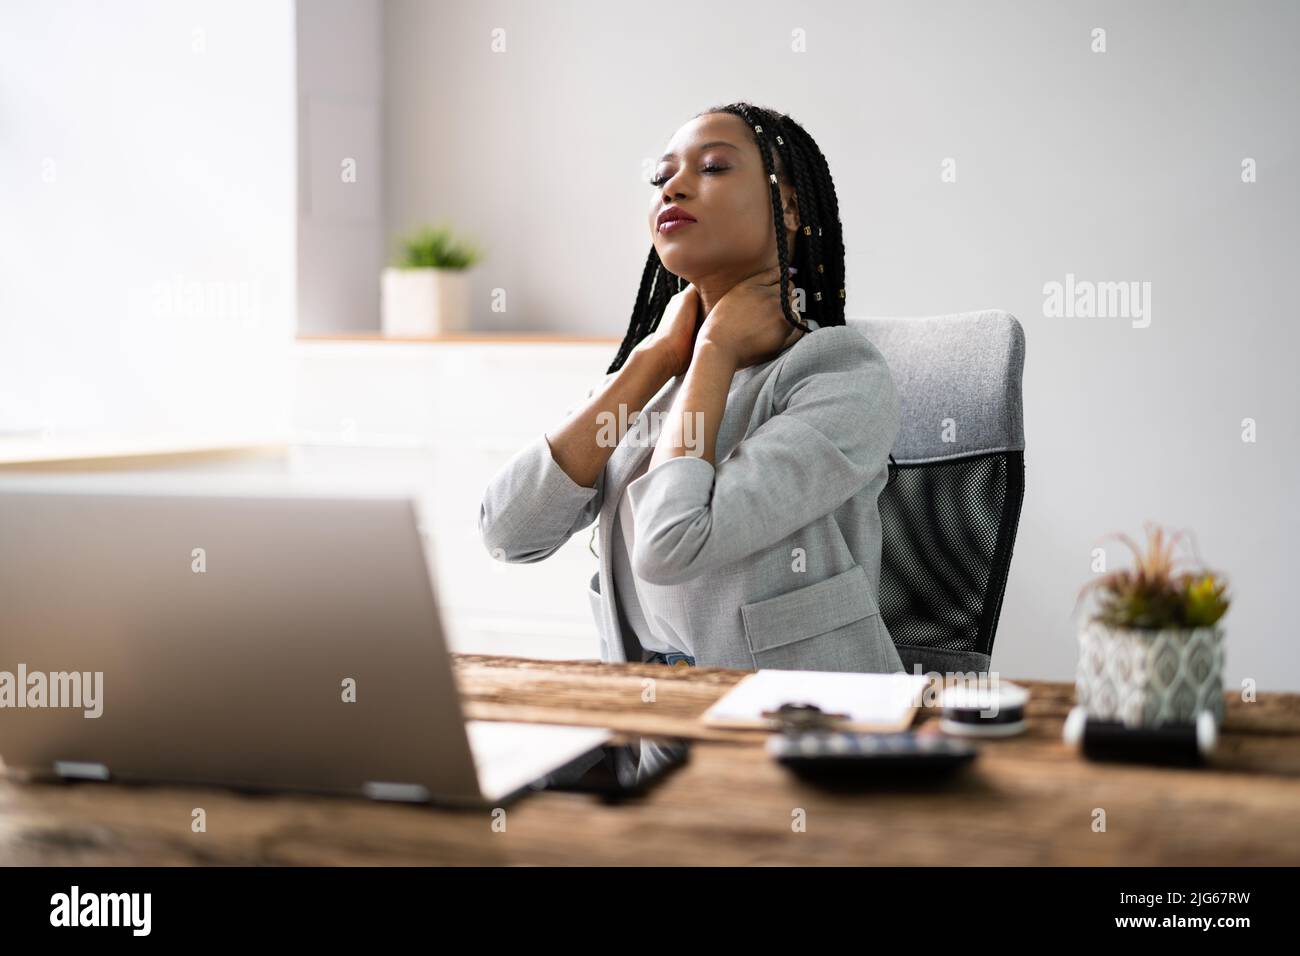 Woman With Bad Posture And Ergonomics While Sitting Stock Photo